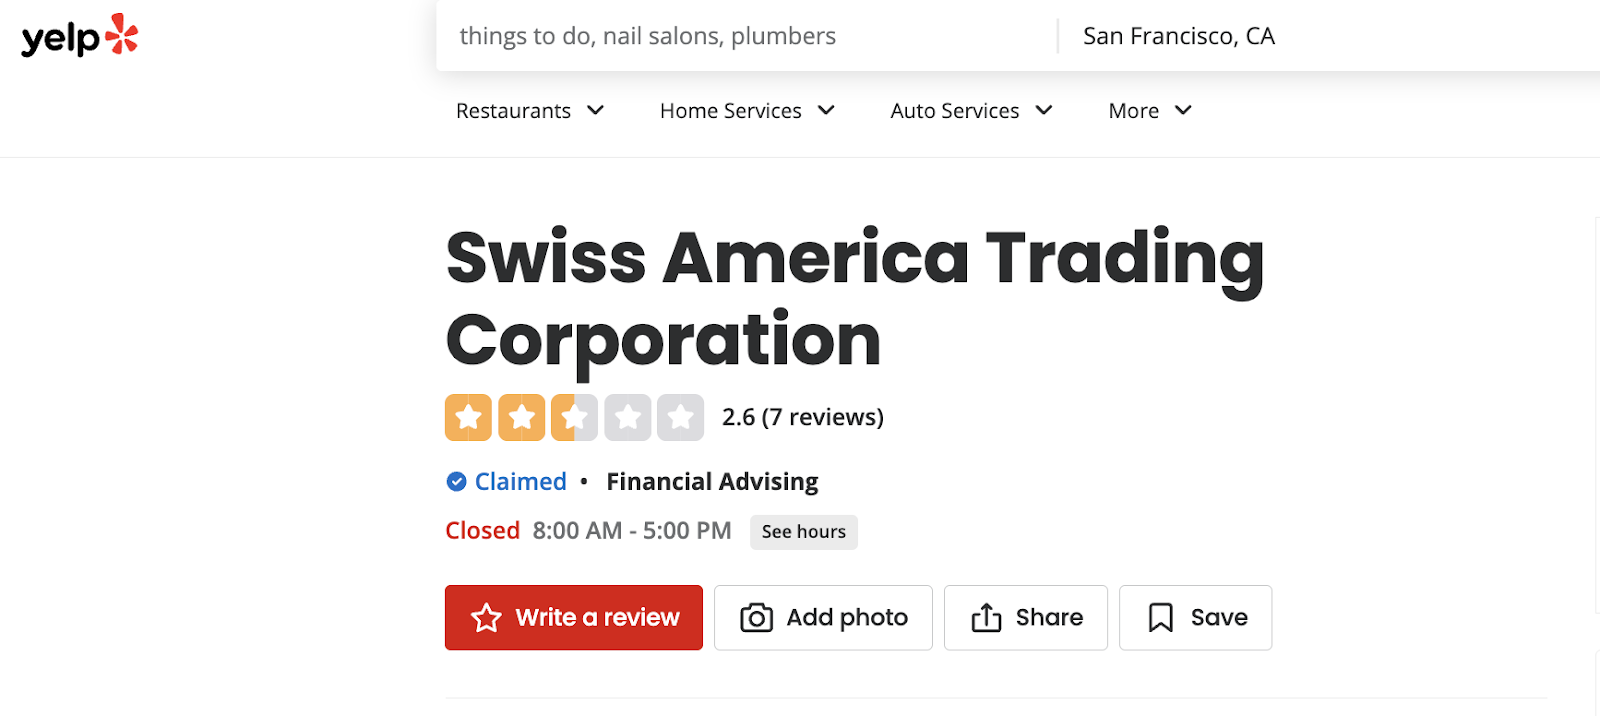 Swiss America Trading Corp complaints on Yelp